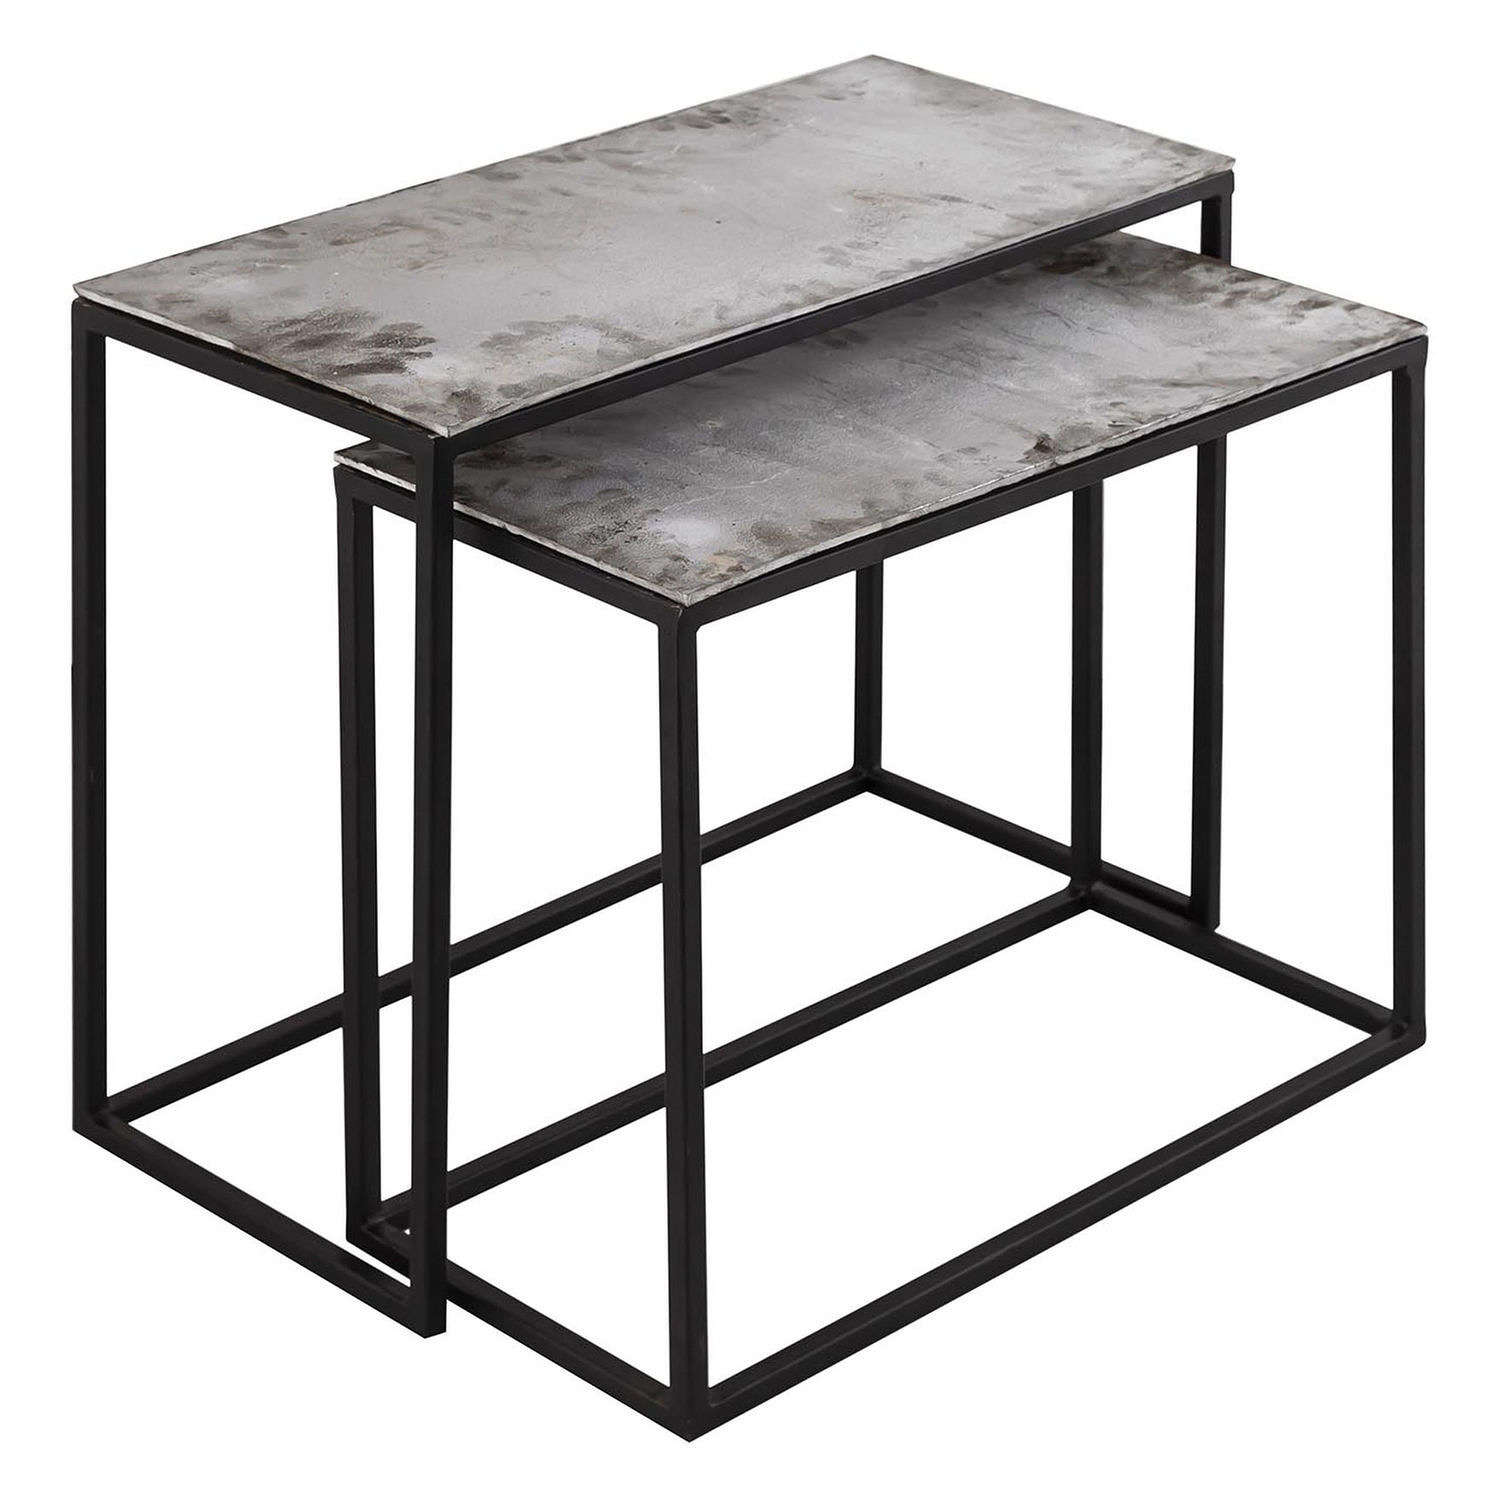 Silver set of 2 Tables - Ref 21546